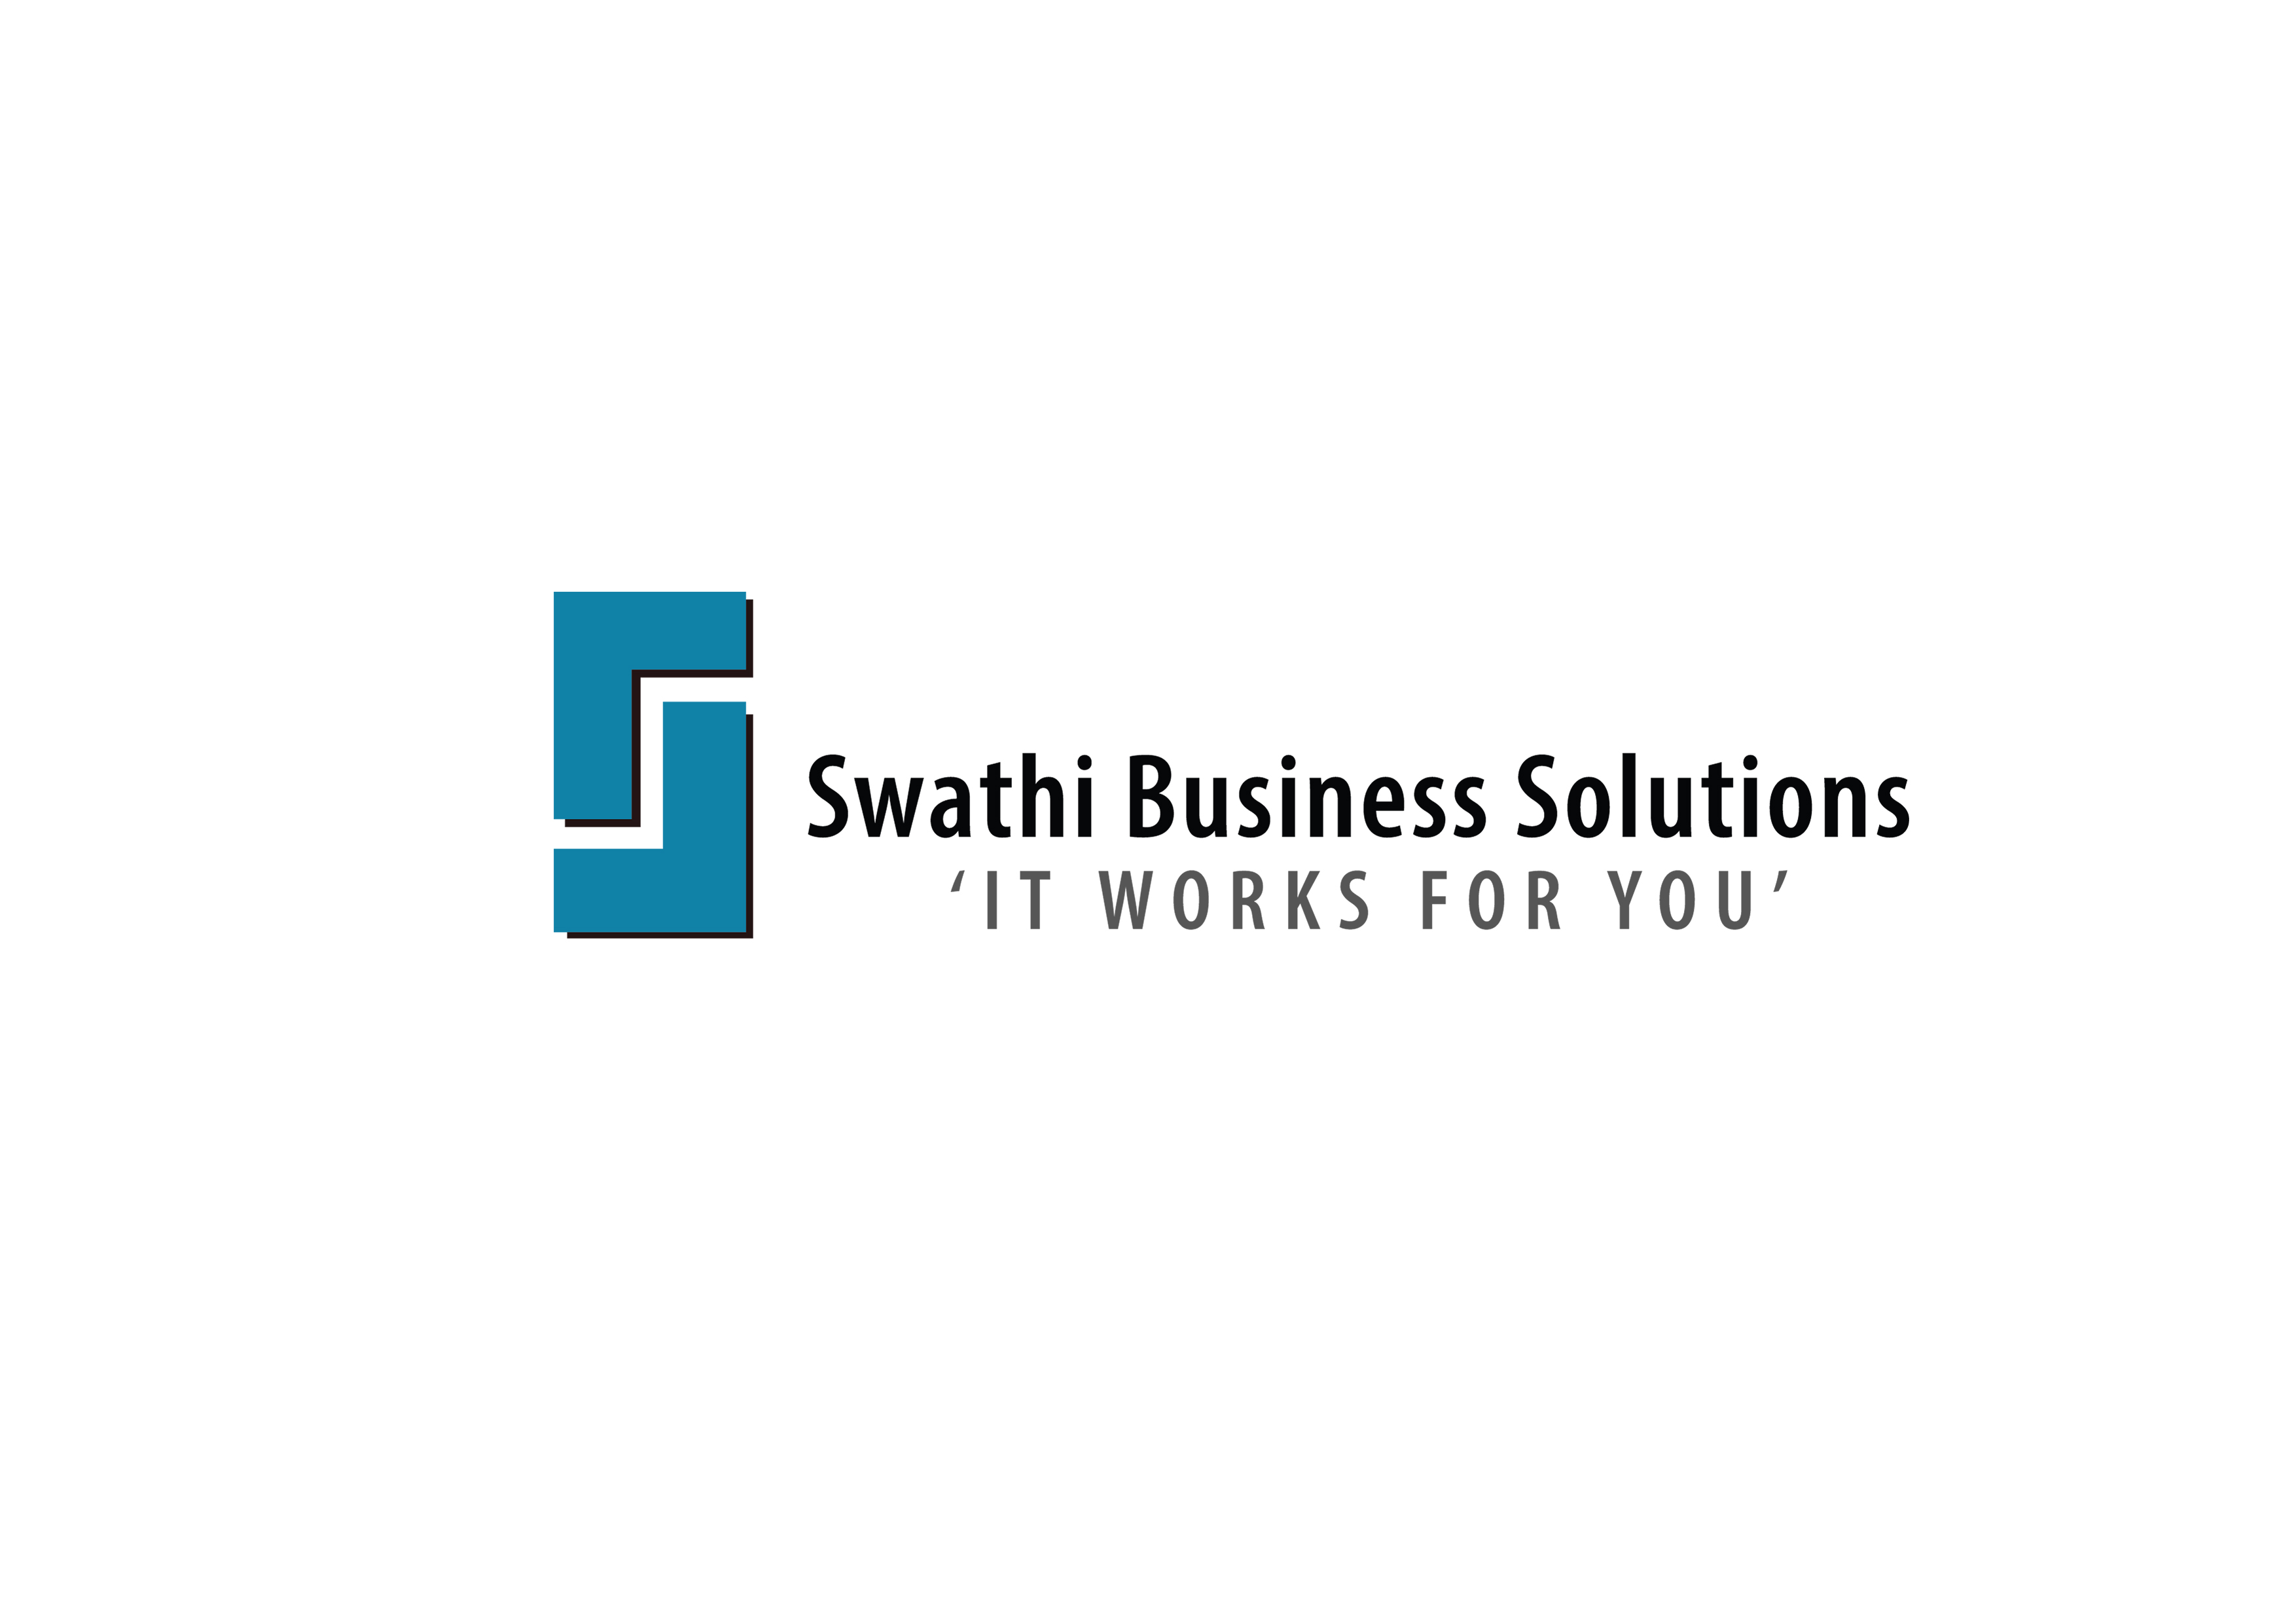 Swathi Business Solutions